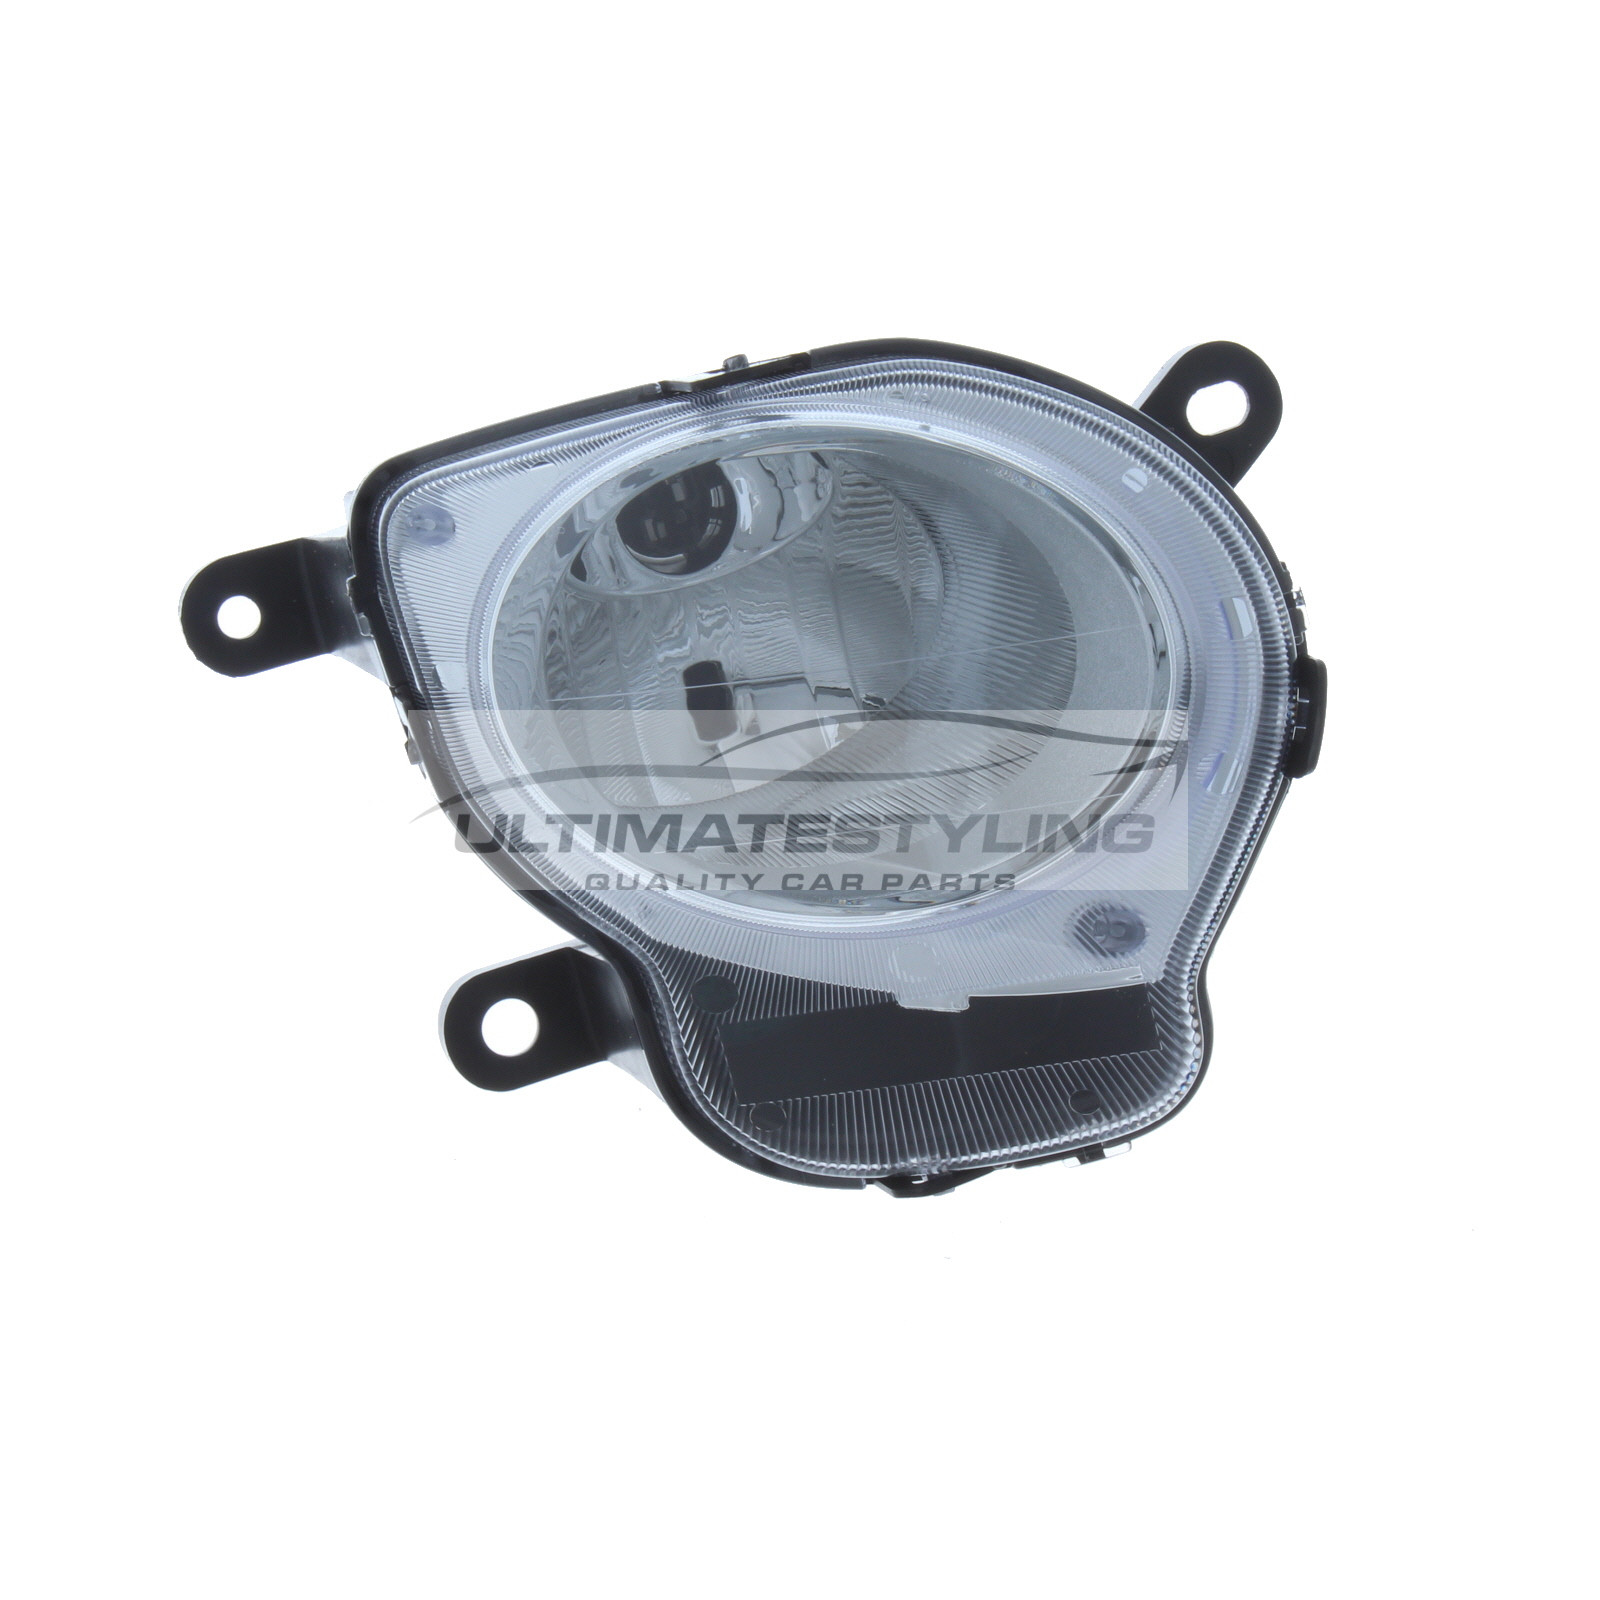 Abarth 500 2015-2016 / Abarth 595 2015-2016 / Abarth 695 2015-2016 / Fiat 500 2008-2015 Manual, Halogen, Front Spot Lamp - High Beam Includes Sidelight - Drivers Side (RH)